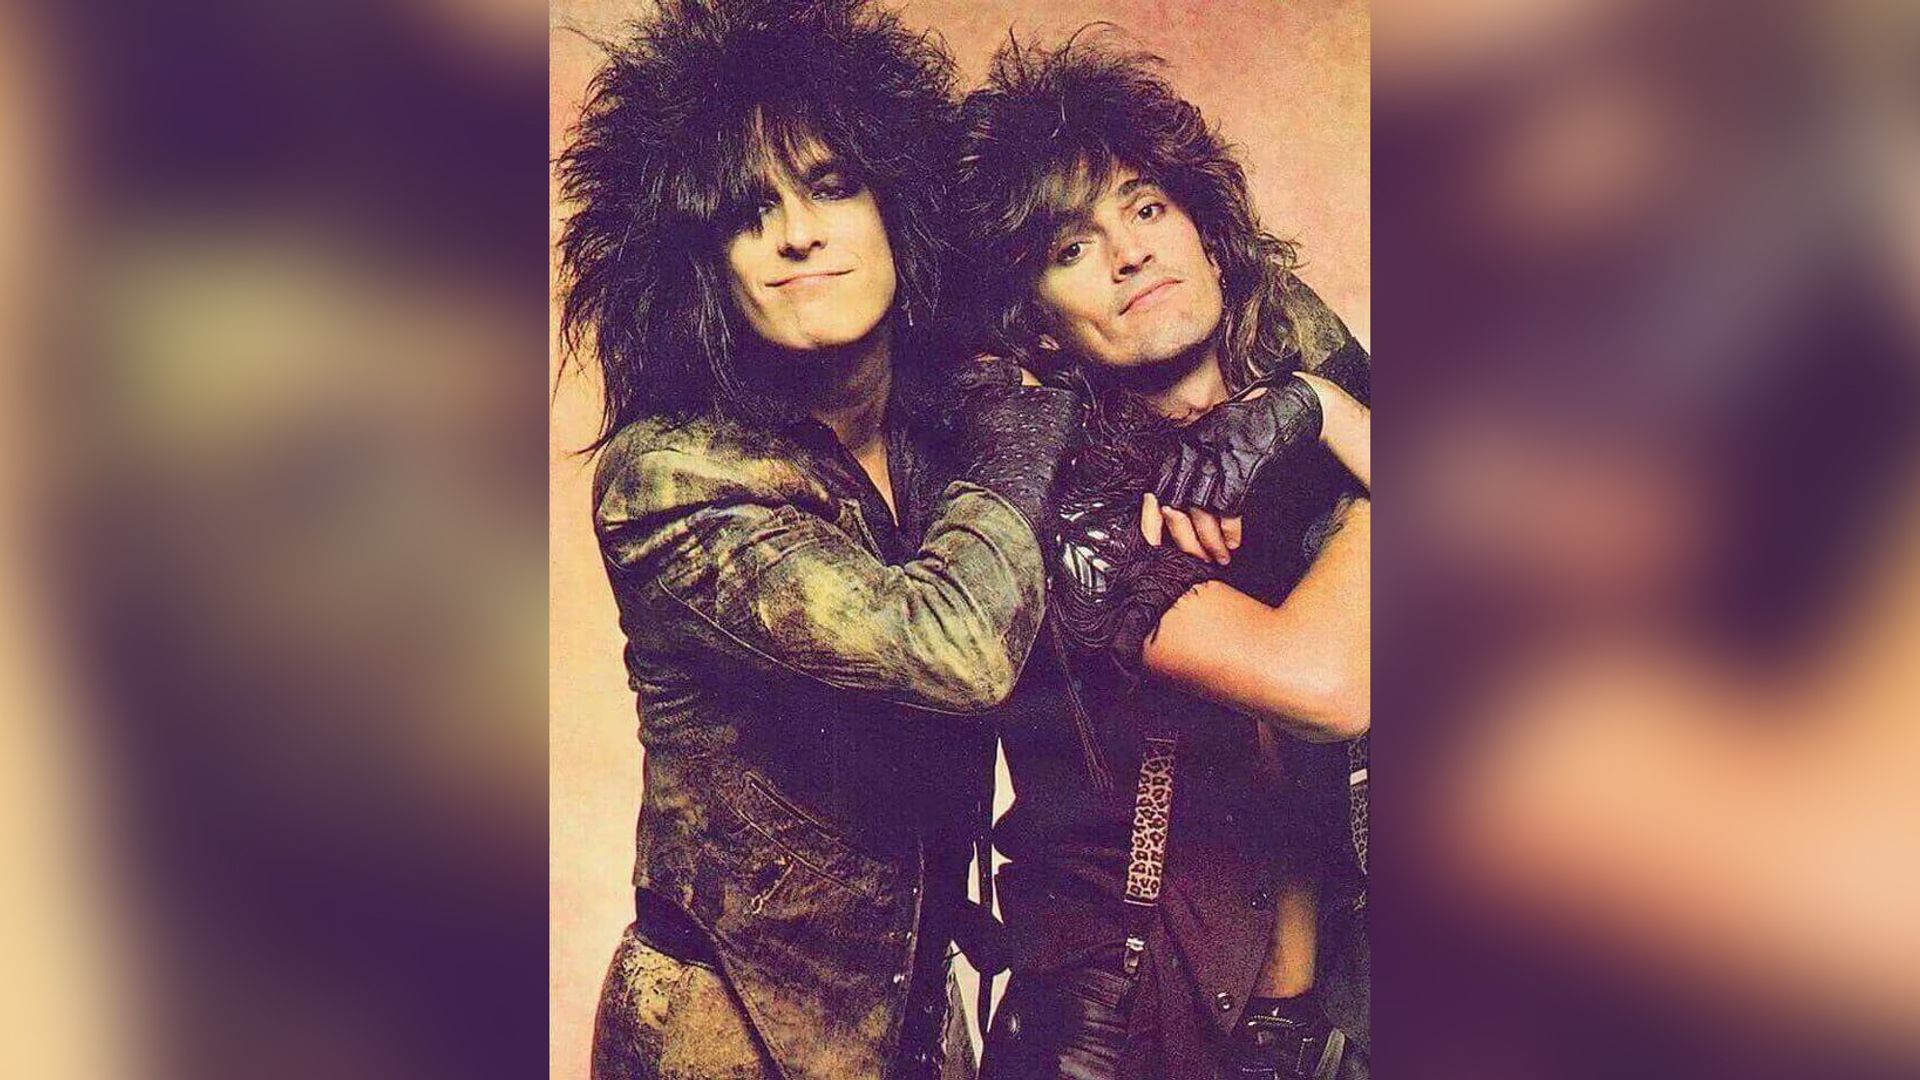 Young Tommy Lee and Nikki Sixx